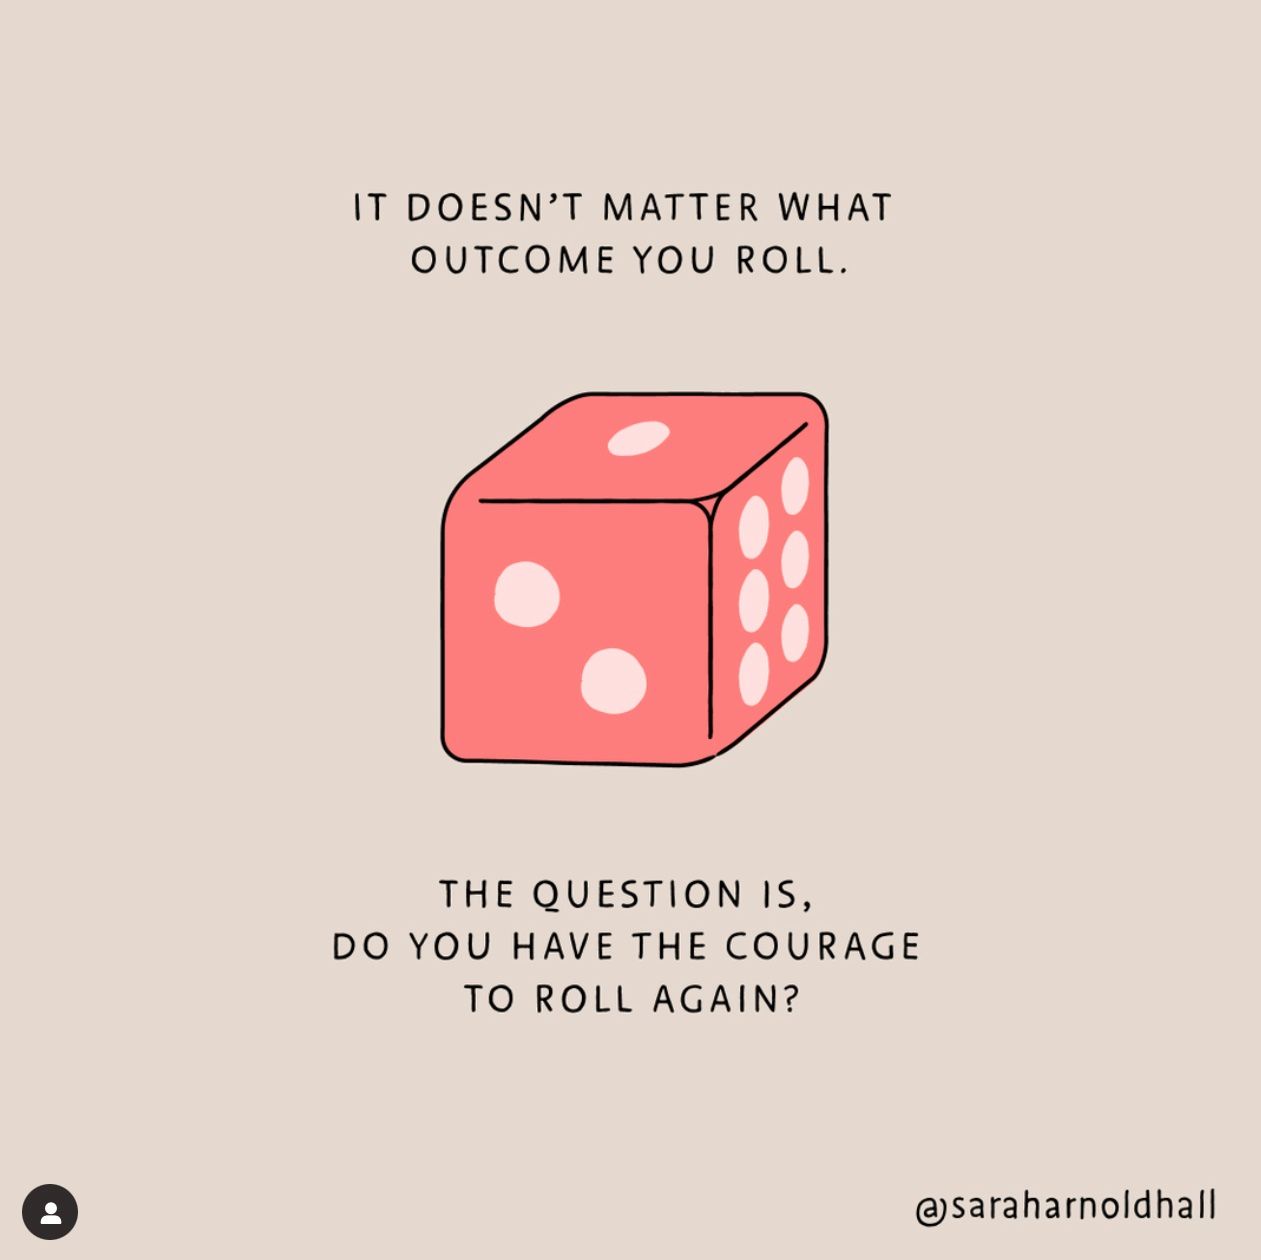 Image of a dice to illustrate that it doesn't matter what outcome you roll and the question is, do you have the courage to roll again?